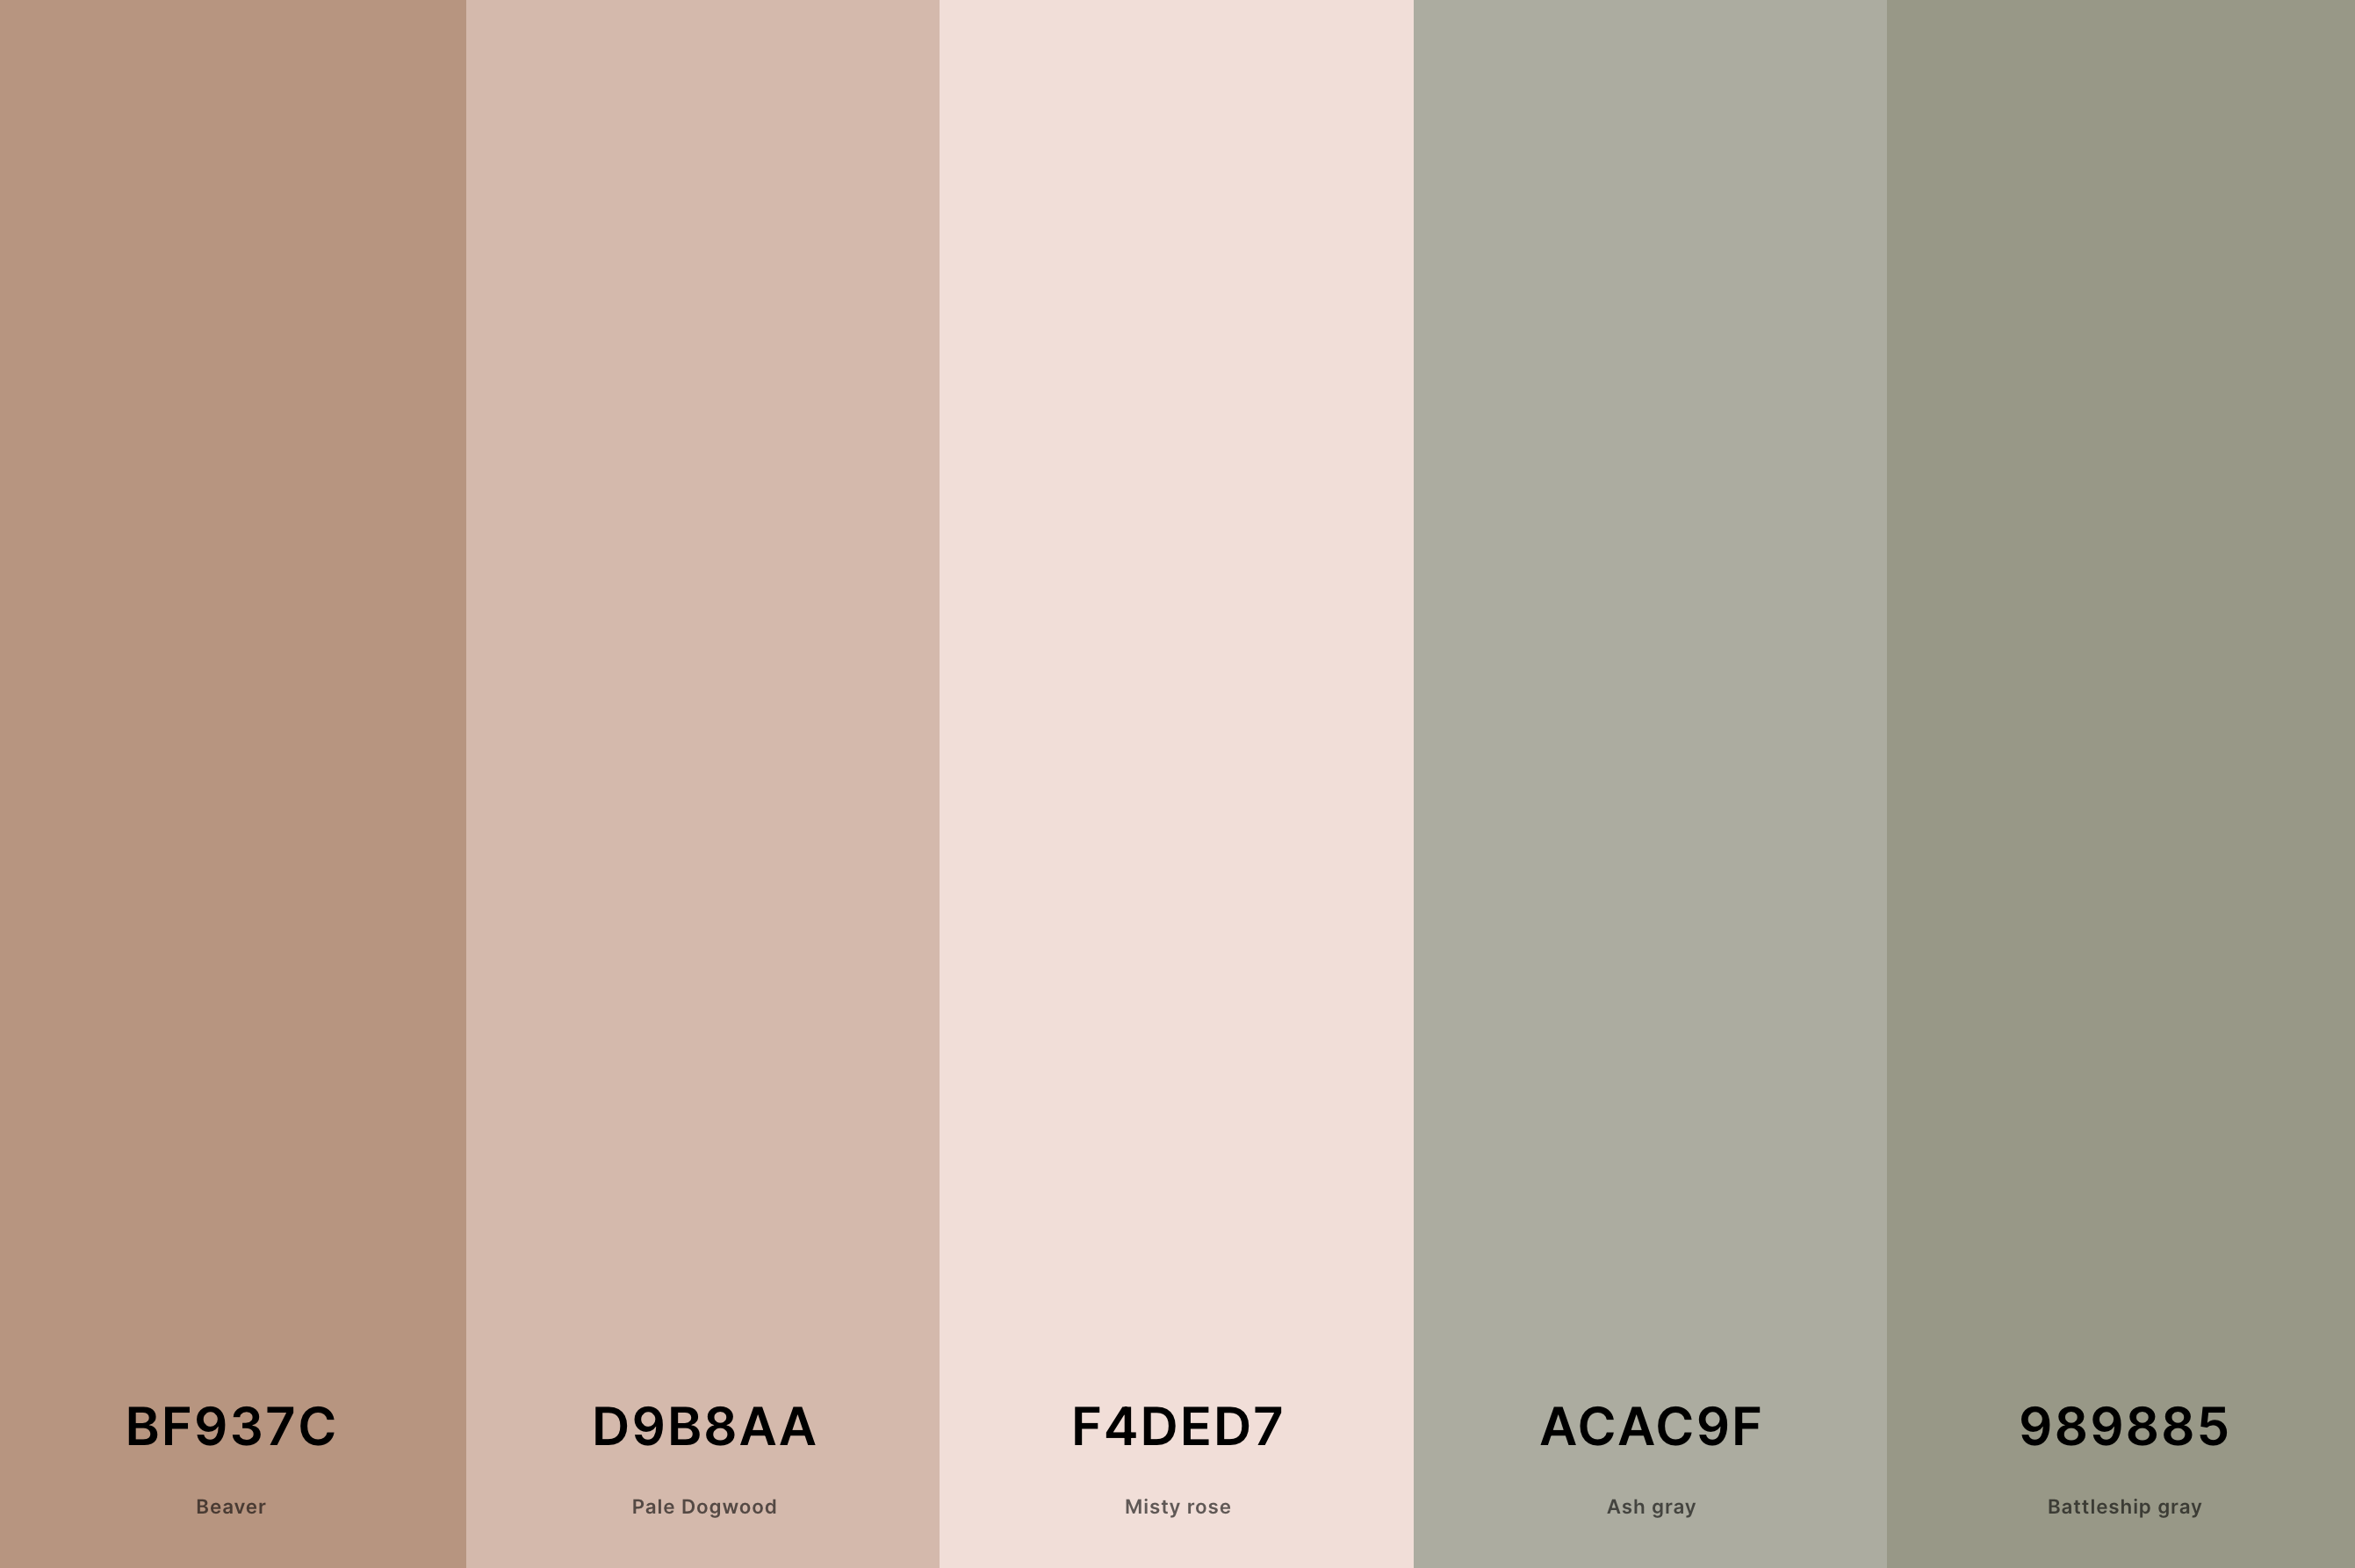 26. Aesthetic Neutral Color Palette Color Palette with Beaver (Hex #BF937C) + Pale Dogwood (Hex #D9B8AA) + Misty Rose (Hex #F4DED7) + Ash Gray (Hex #ACAC9F) + Battleship Gray (Hex #989885) Color Palette with Hex Codes